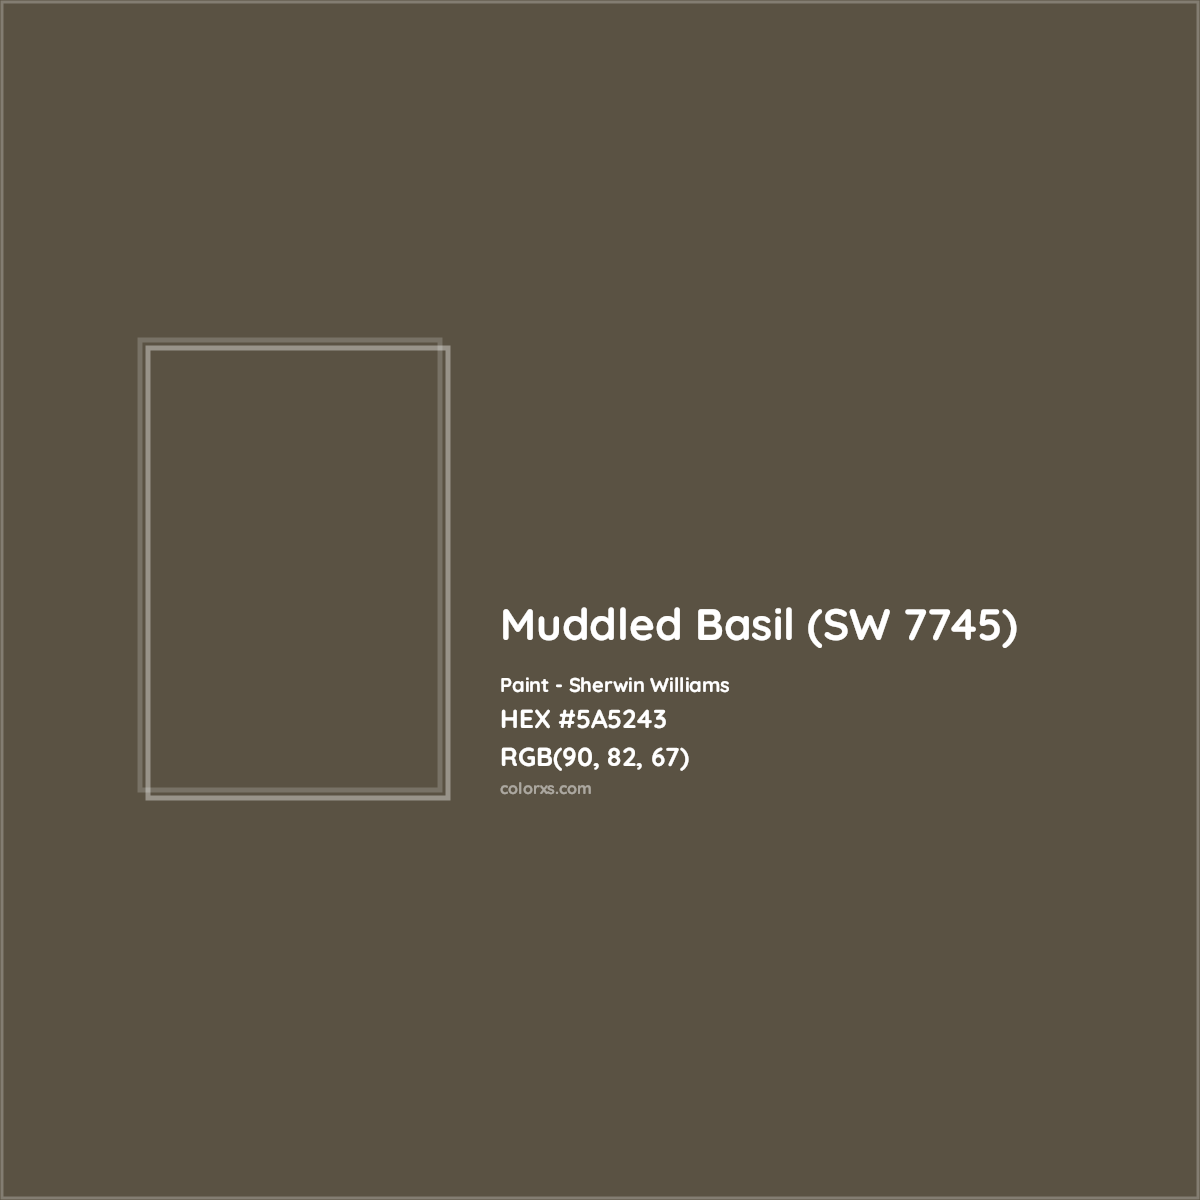 HEX #5A5243 Muddled Basil (SW 7745) Paint Sherwin Williams - Color Code